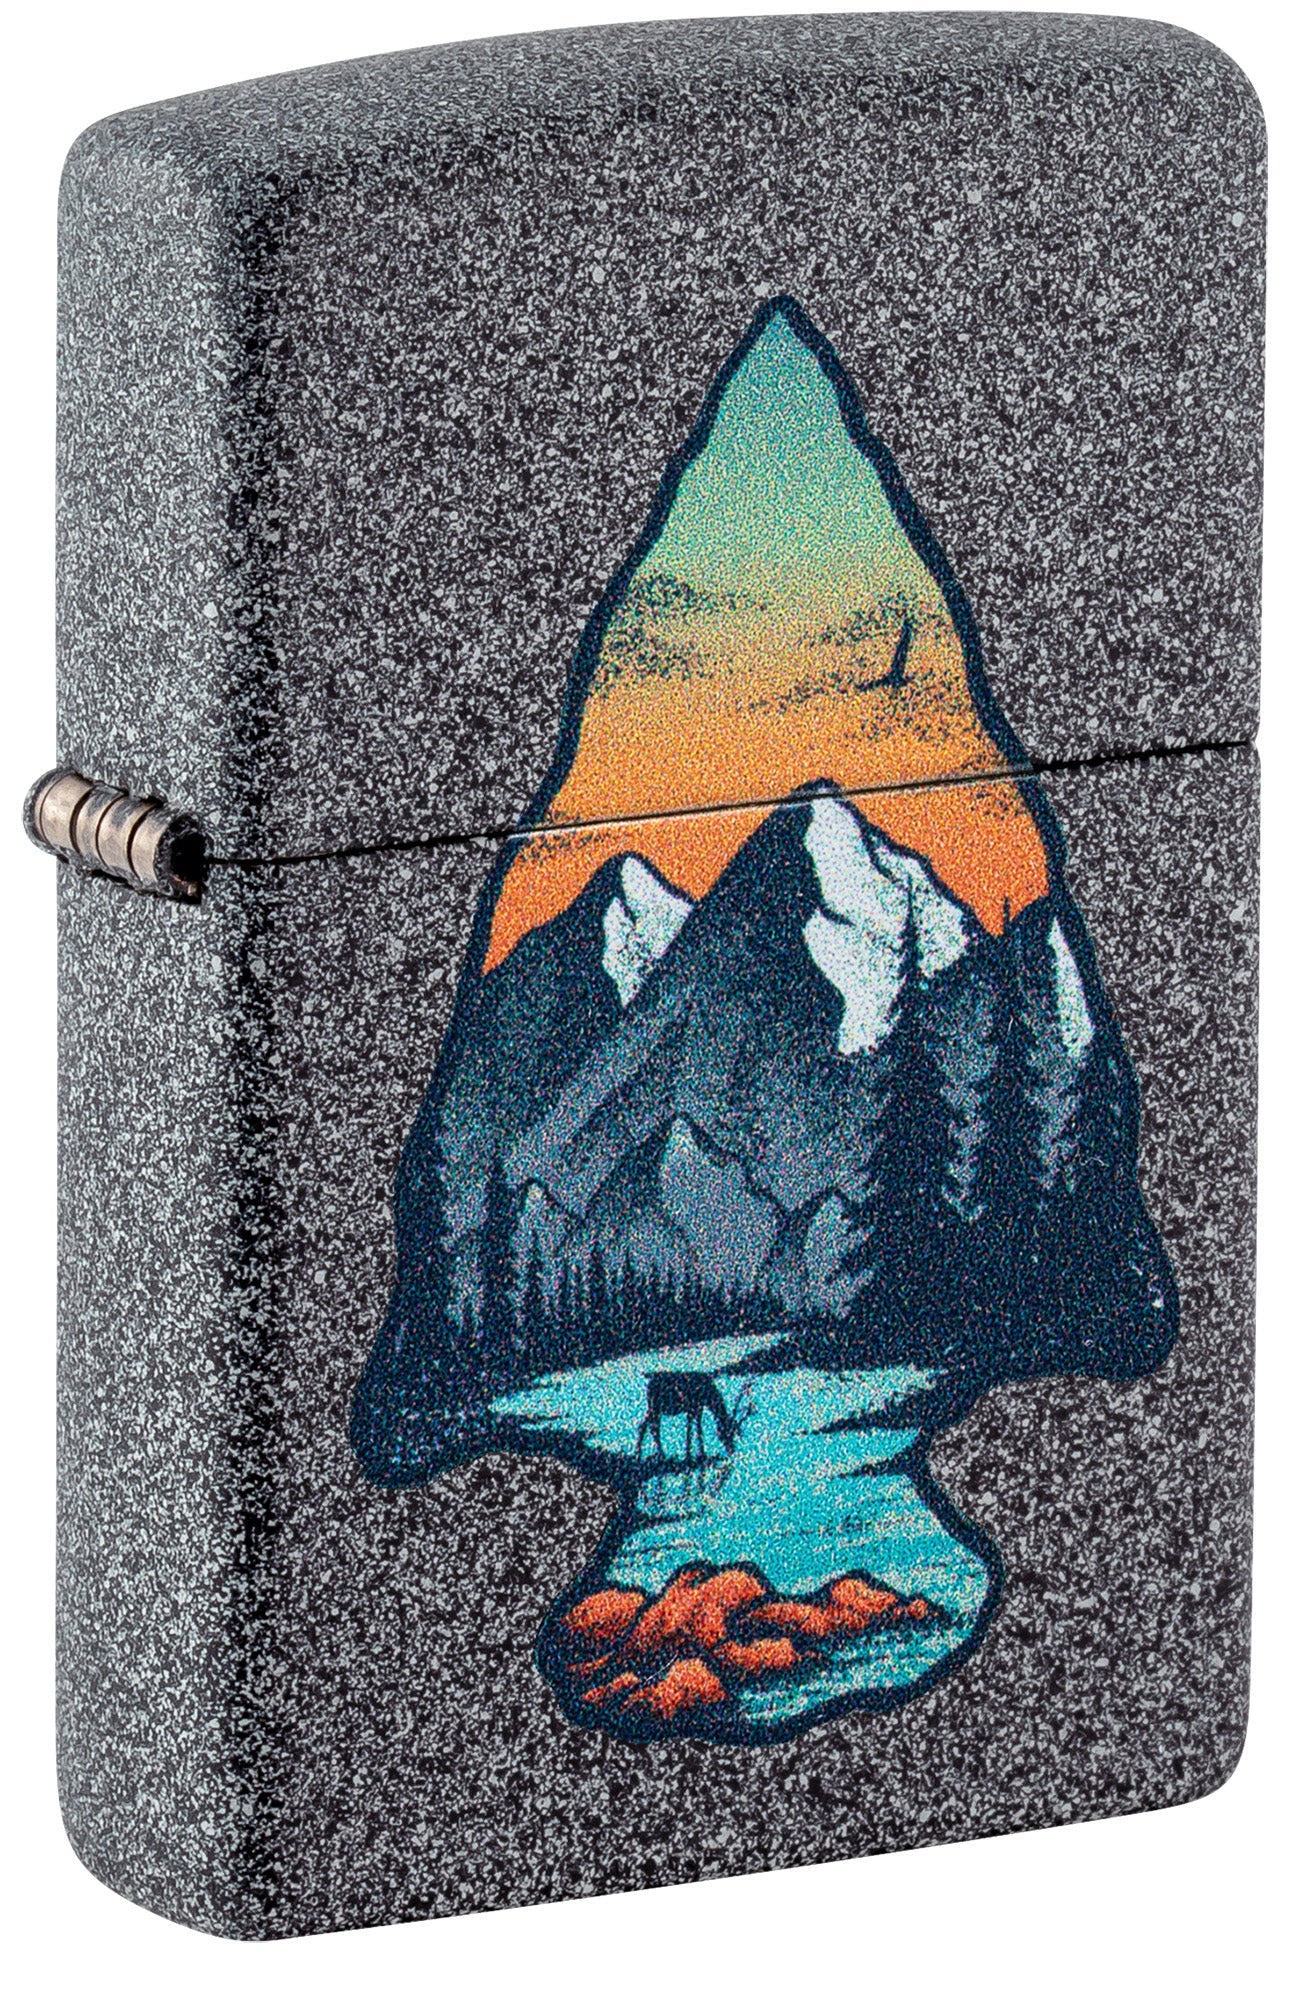 Zippo Lighter: Rainbow Trout Fishing - Brushed Chrome 78267 – Lucas Lighters